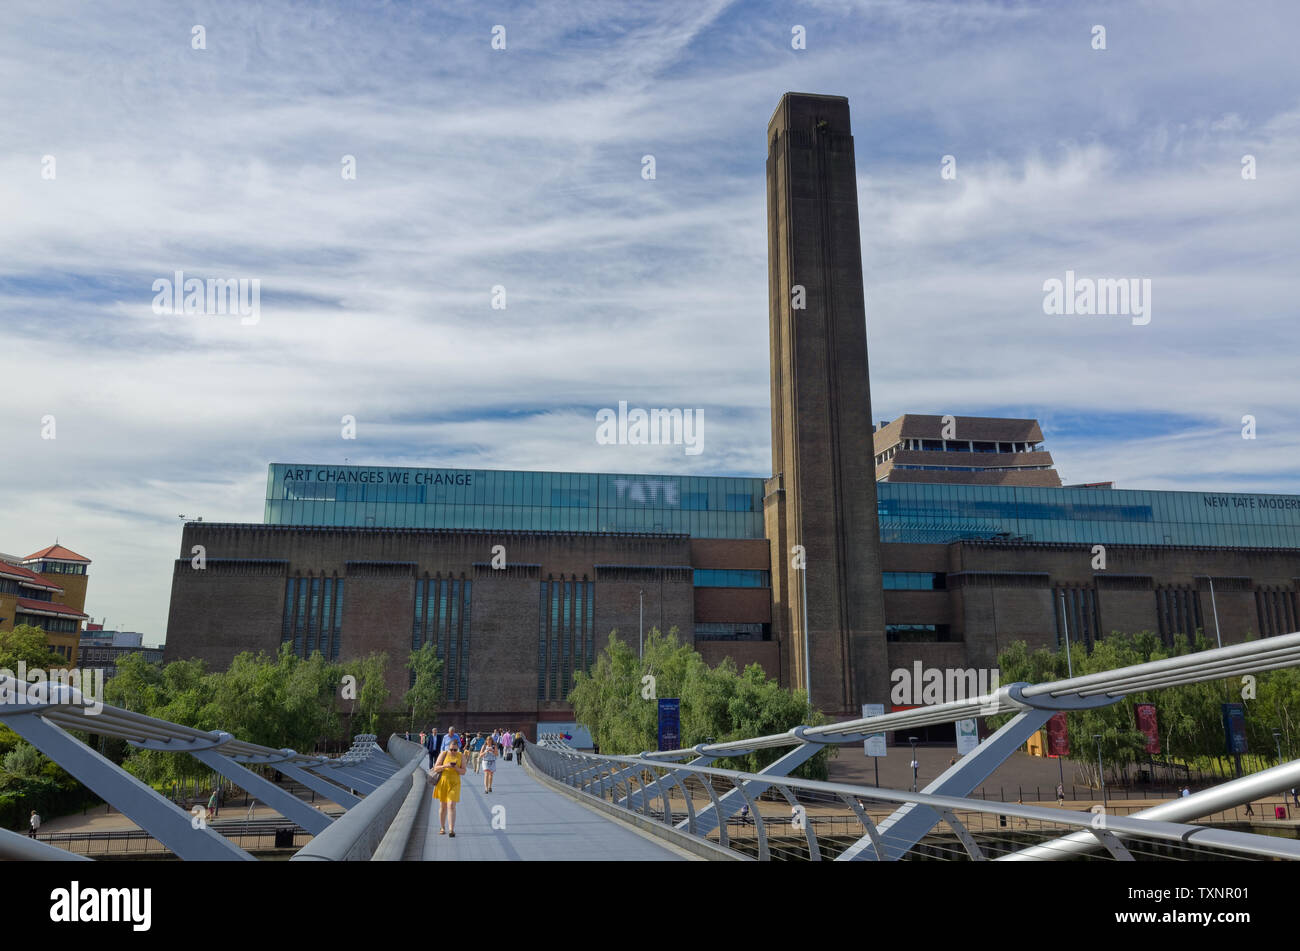 New Tate Modern art gallery from the Millenium Bridge, London, England on a late spring morning. Stock Photo